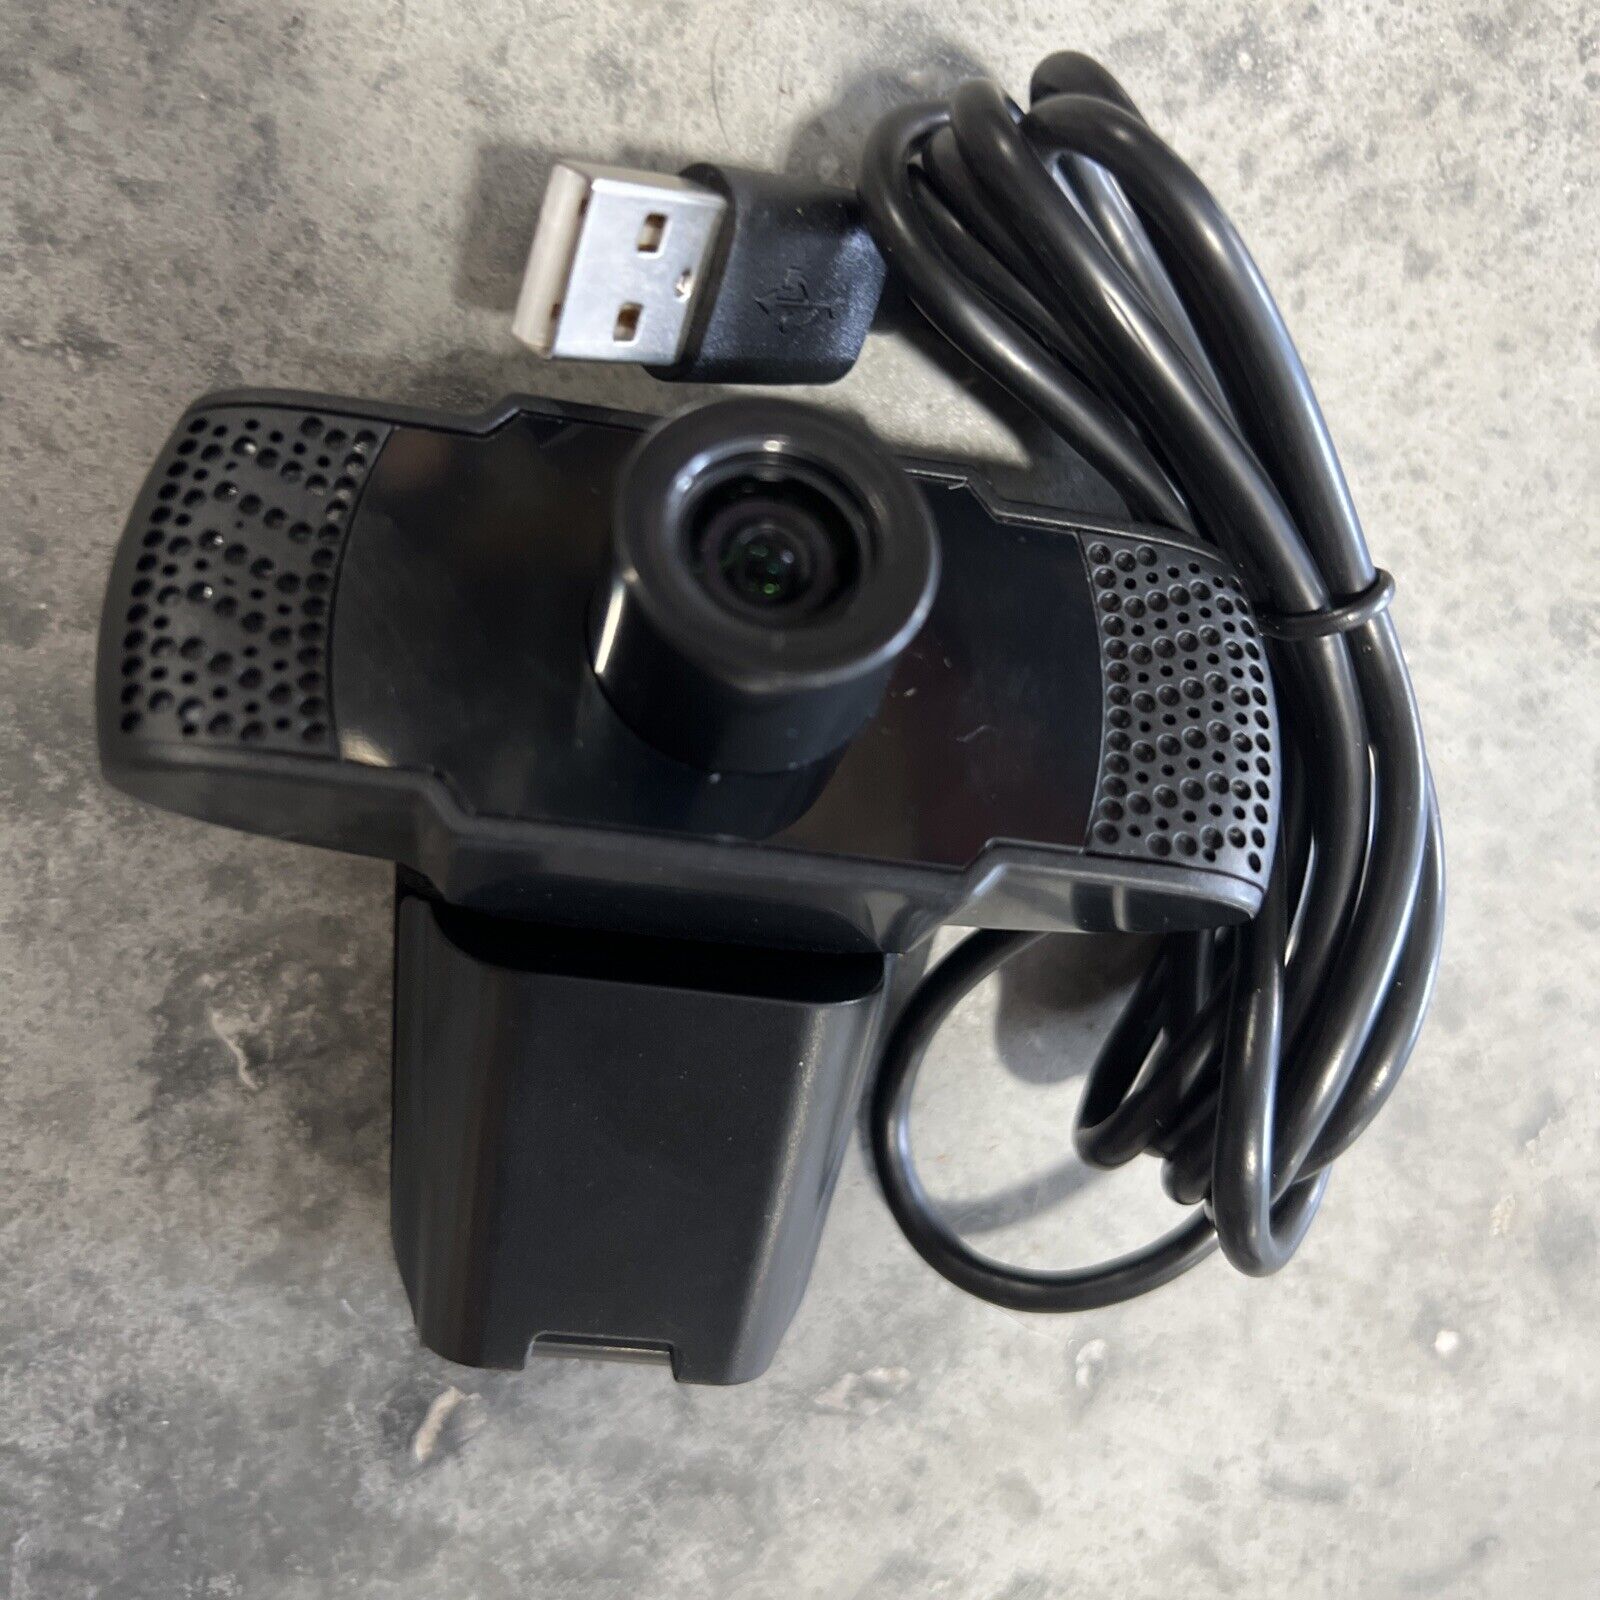 1080P Webcam with Microphone wb-05 USB 2.0 For Video Streaming *NEW*